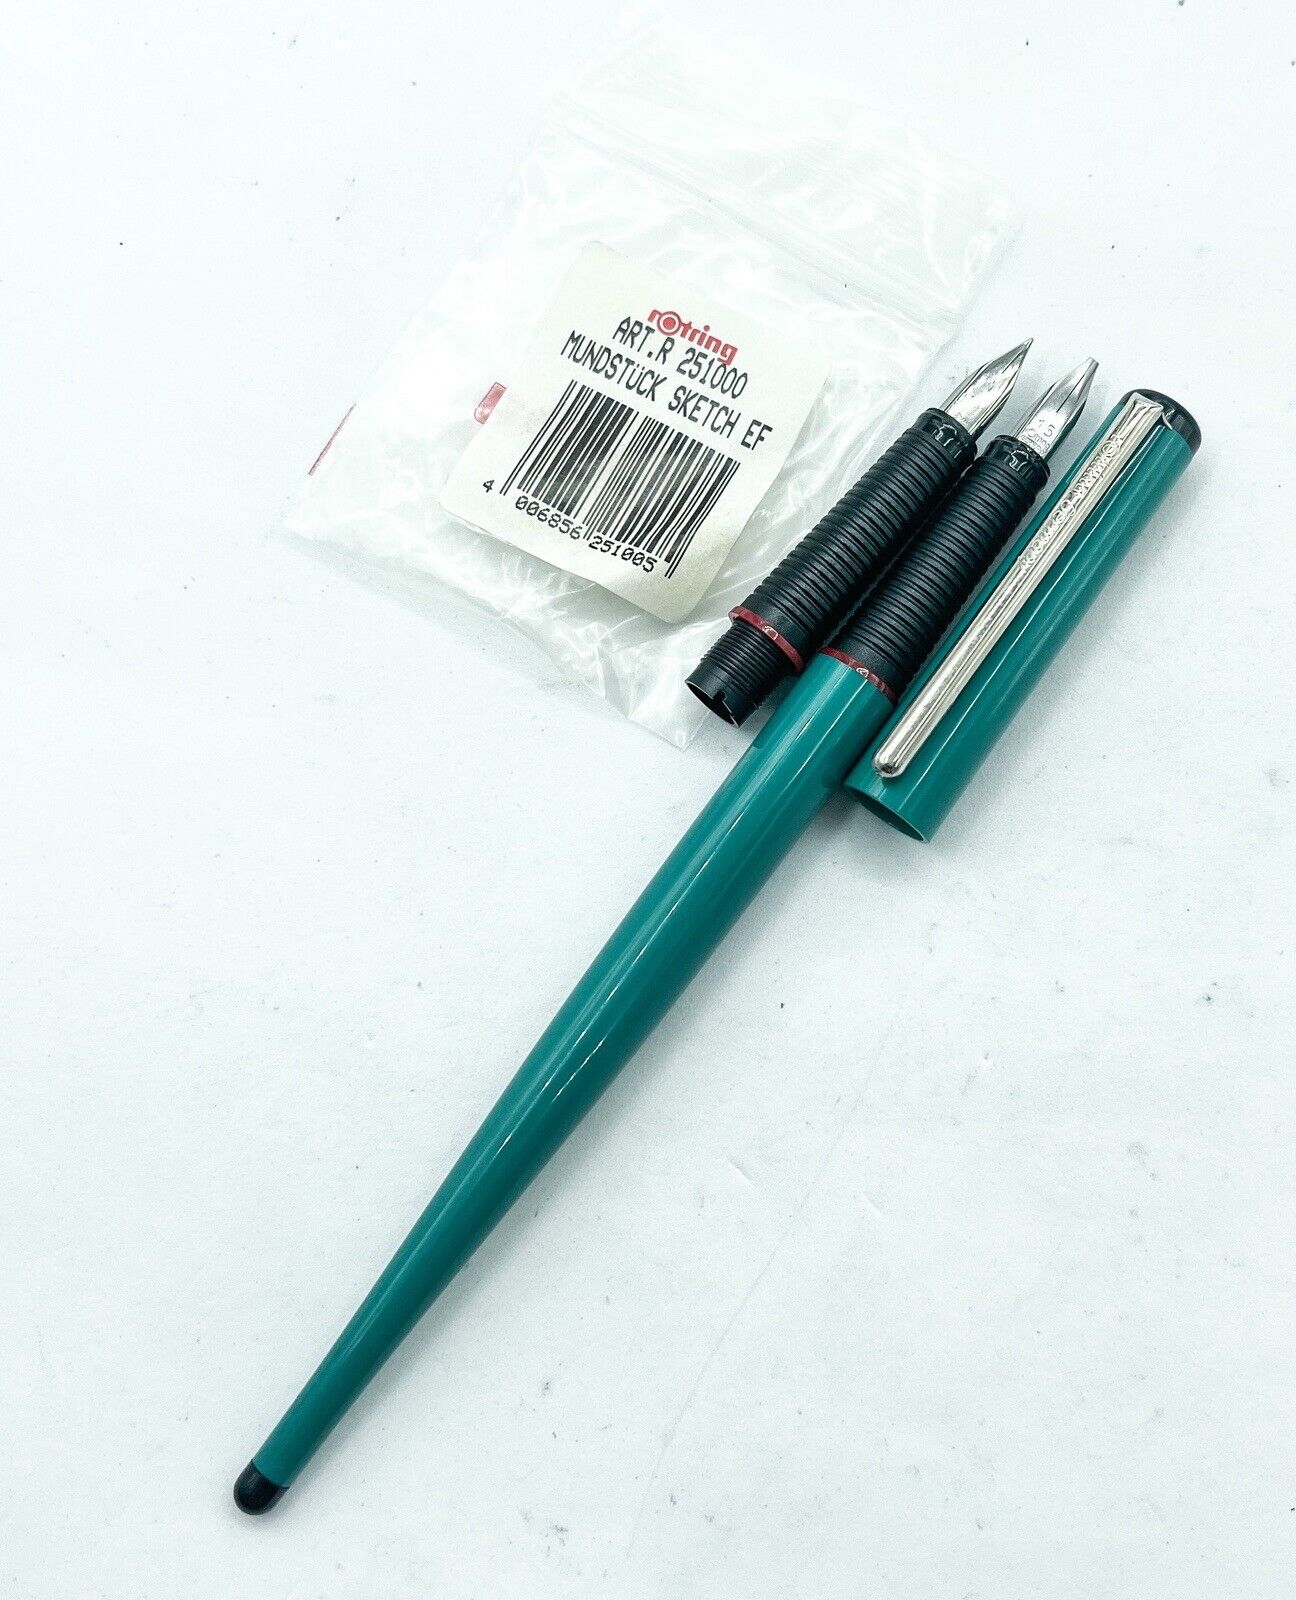 New Rotring Art Pen Fountain Pen Limited turquoise Extra EF Nib 